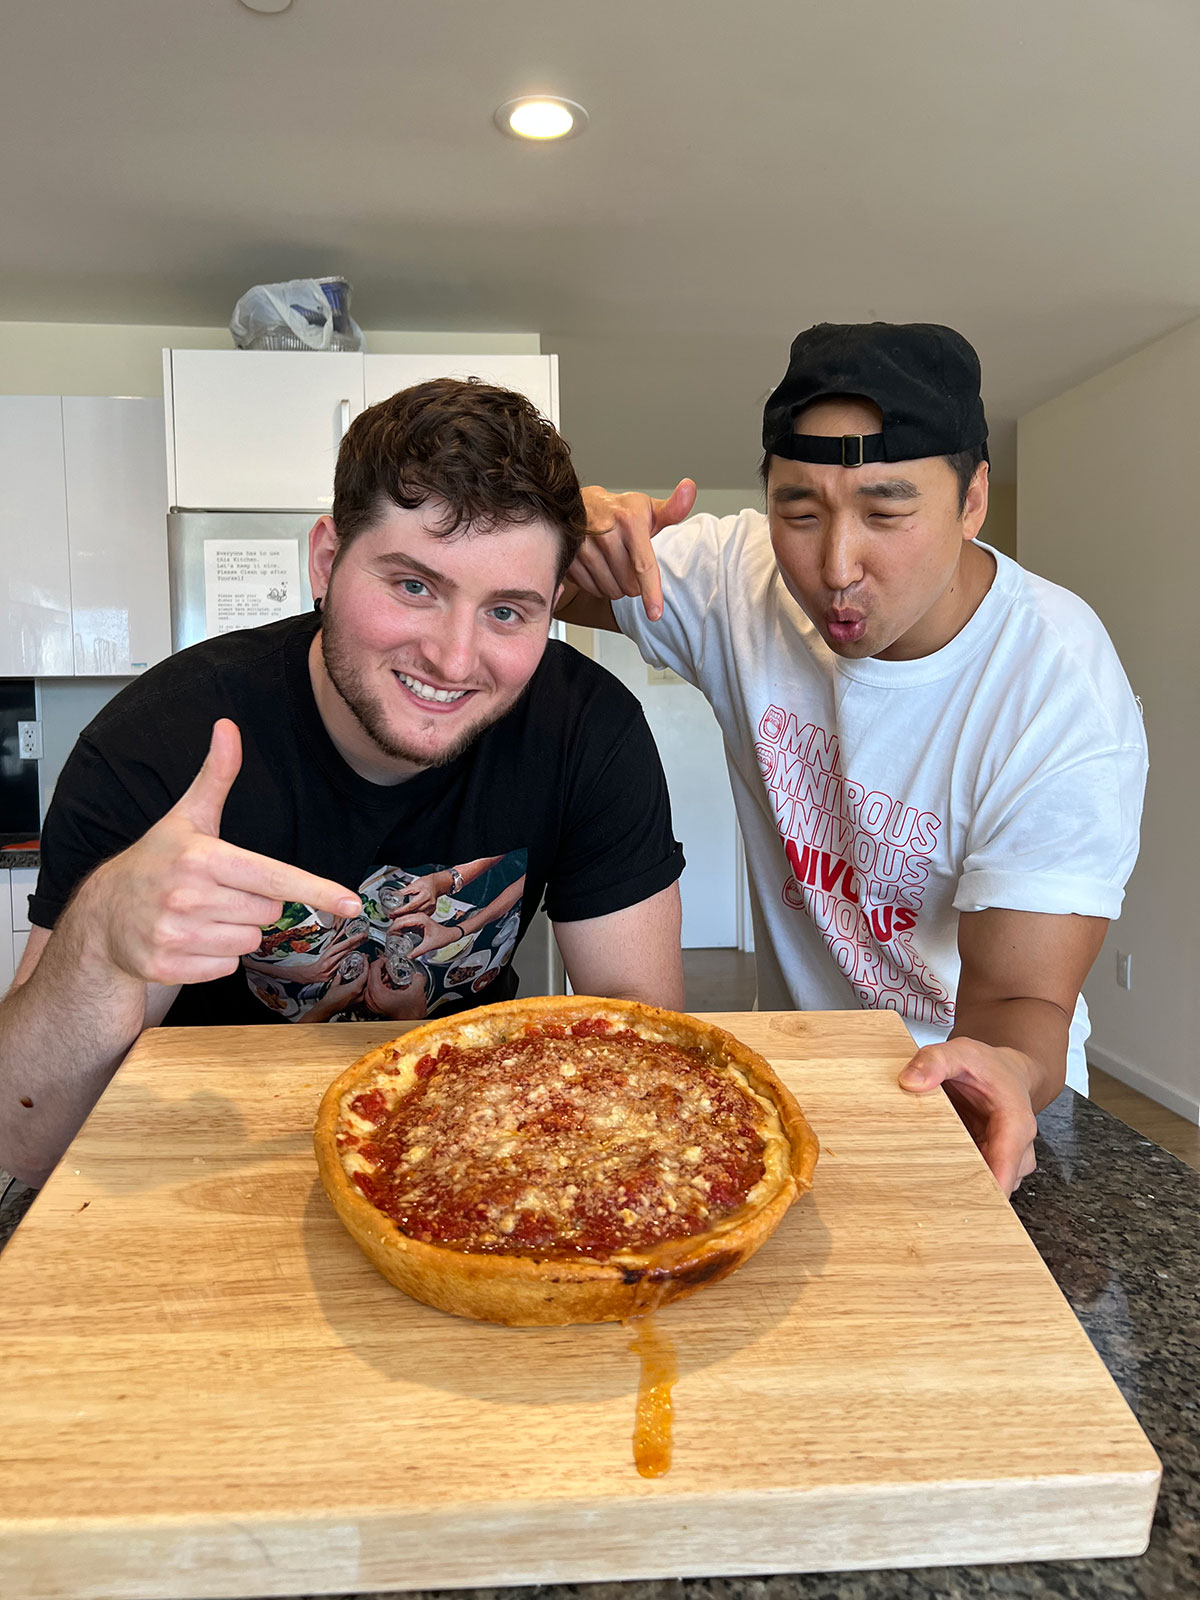 Chicago-Style Deep Dish Pizza with Italian Sausage Recipe